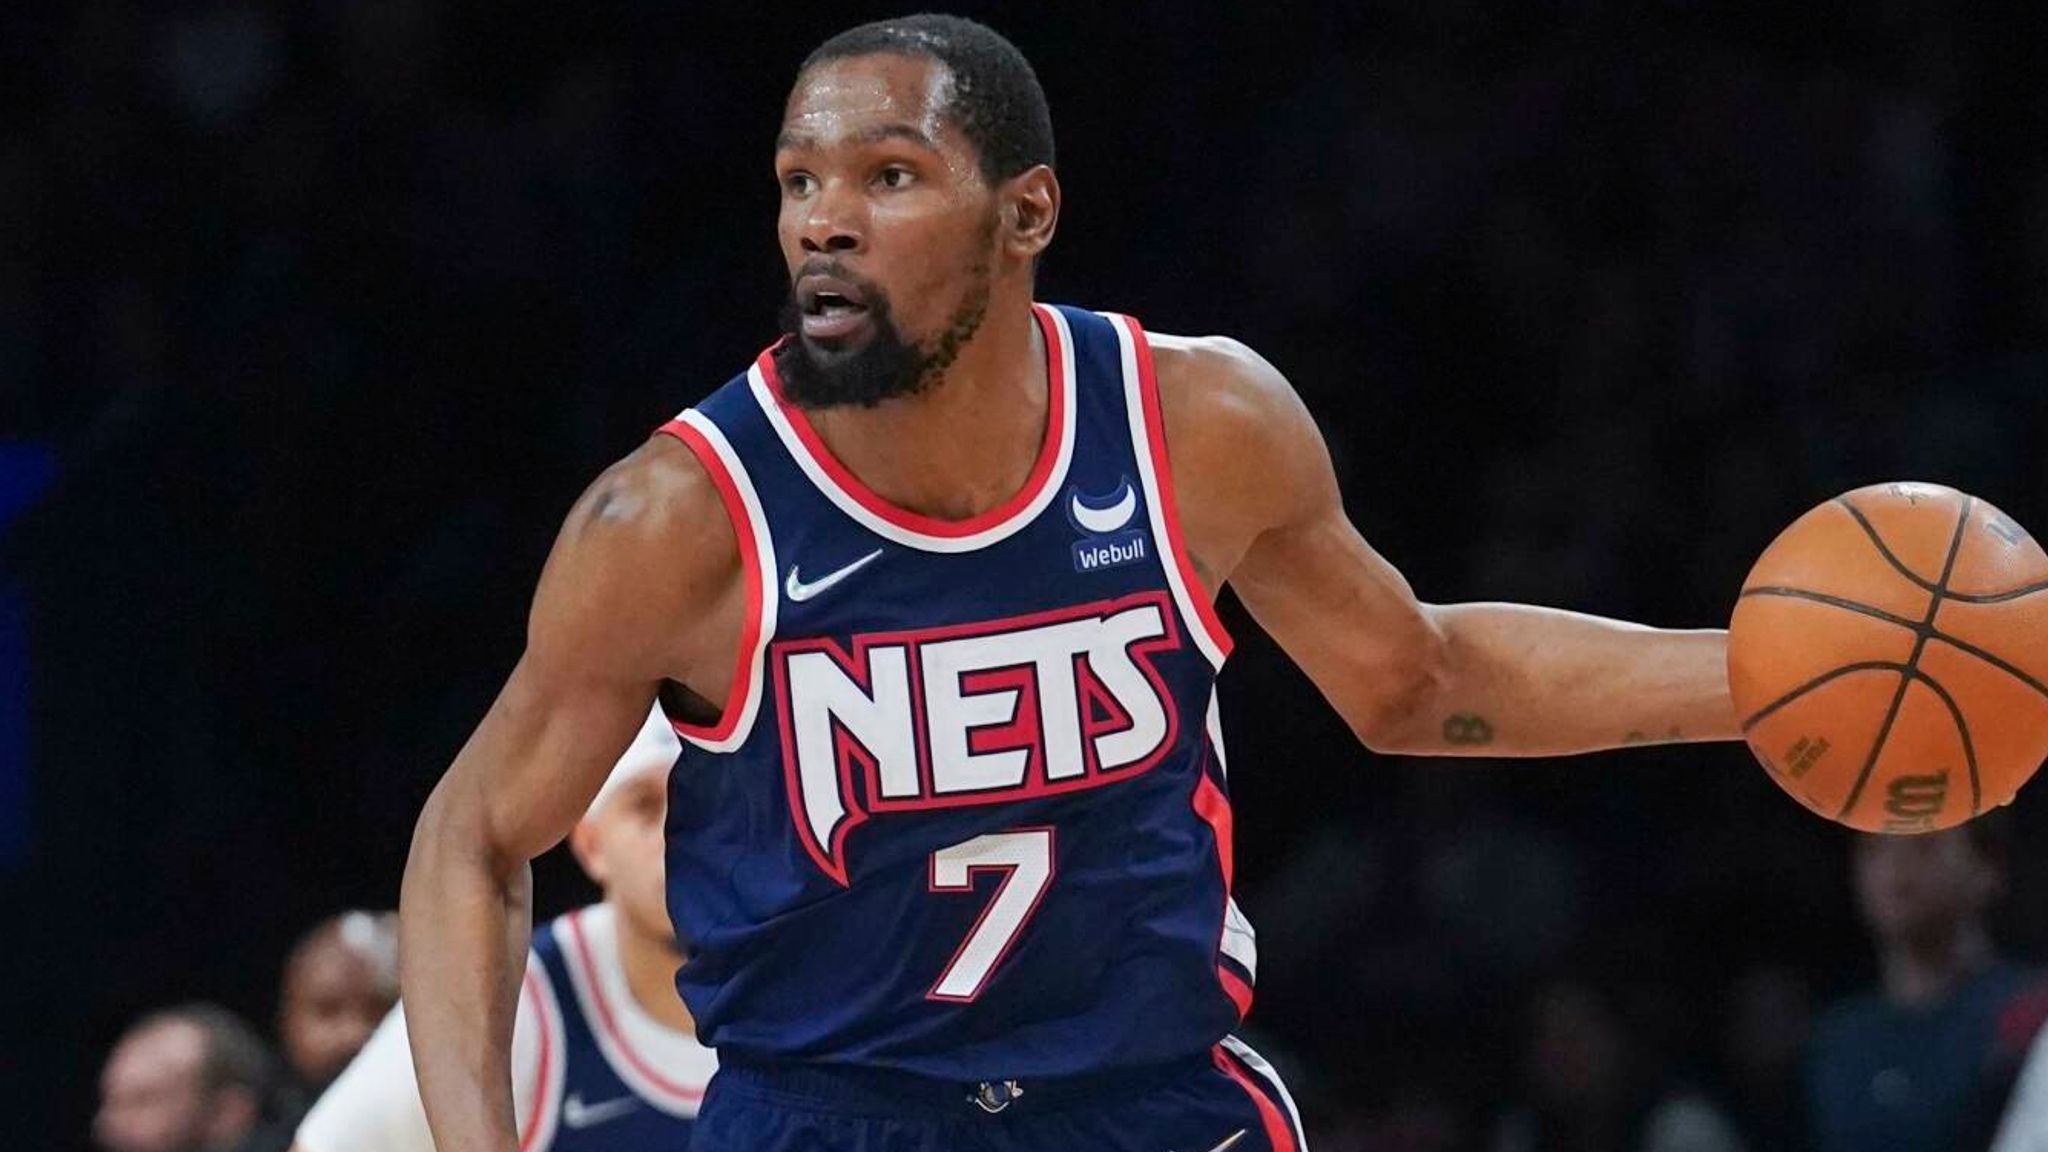 Kevin Durant: 'The cool thing now is not the Knicks' with younger